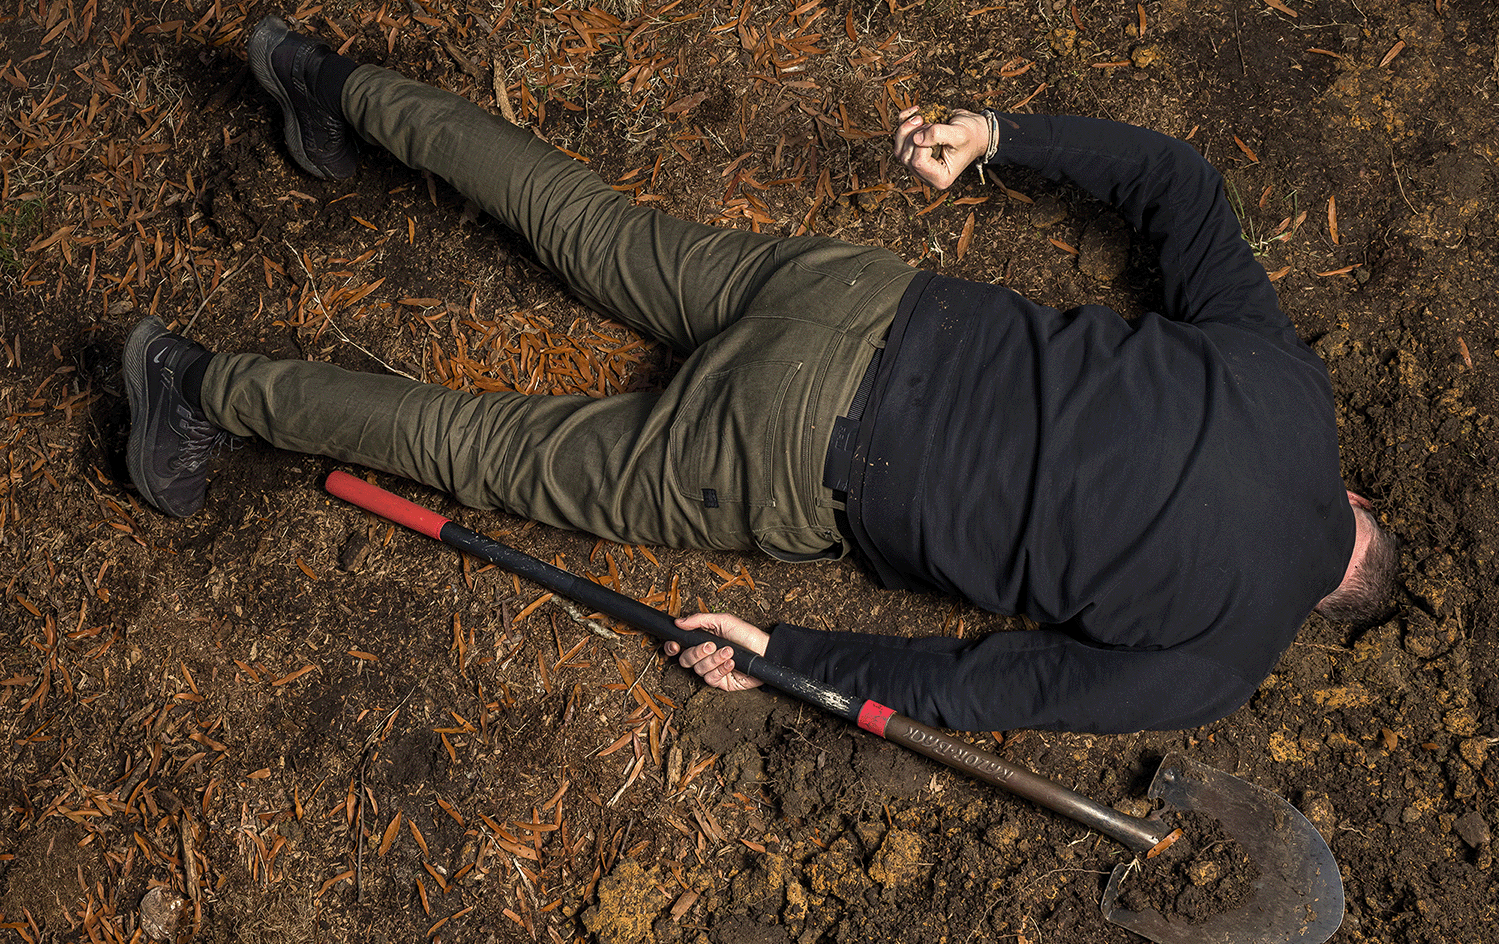 A man lies face down in the ground, with a shovel in one hand and the other clenched around a fistful of dirt.